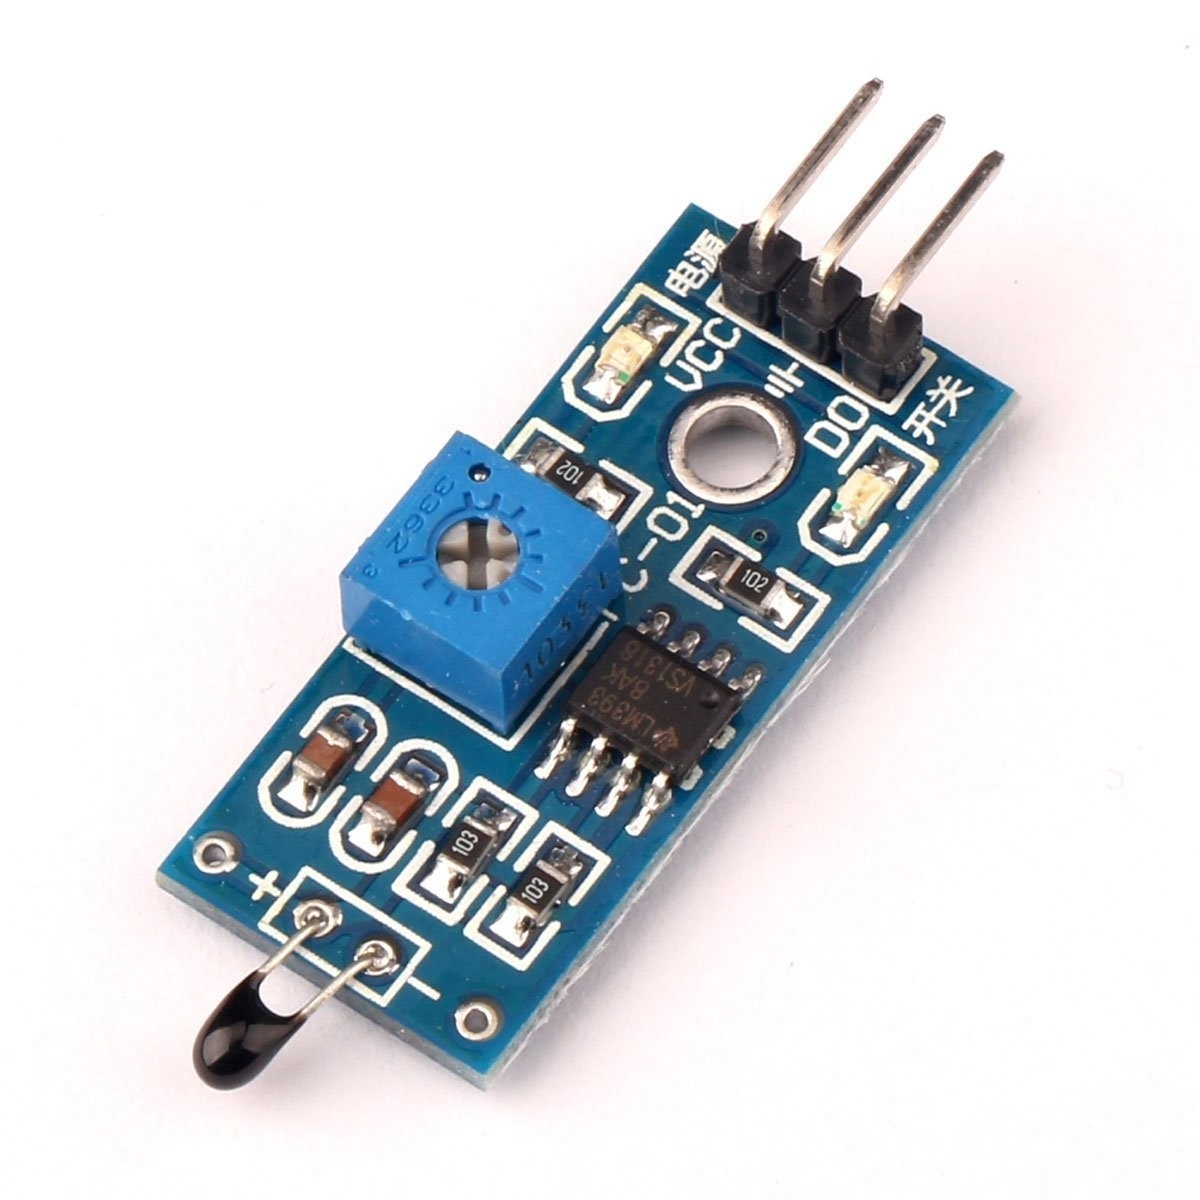 NTC Themistor Module LM393 (Temperature up to 80 Degree Celsius),MOD-TS Sensor  Modules Hobby / Education